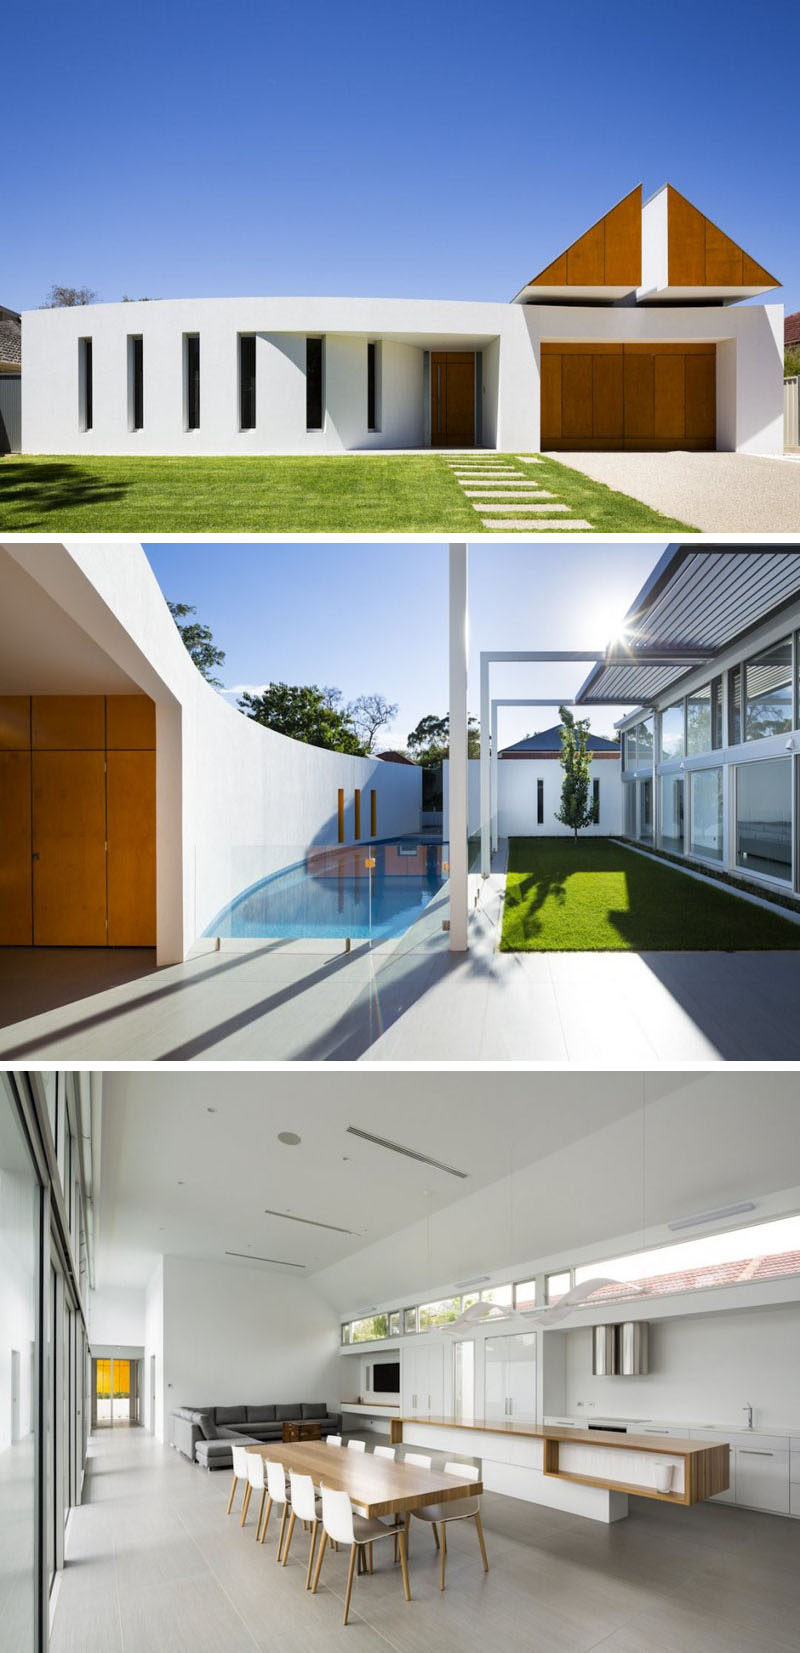 Celebrate Australia Day With These 14 Contemporary Australian Houses | The clean white look of the exterior of this Adelaide home continues inside where simple, bright, minimalist decor fills the space.